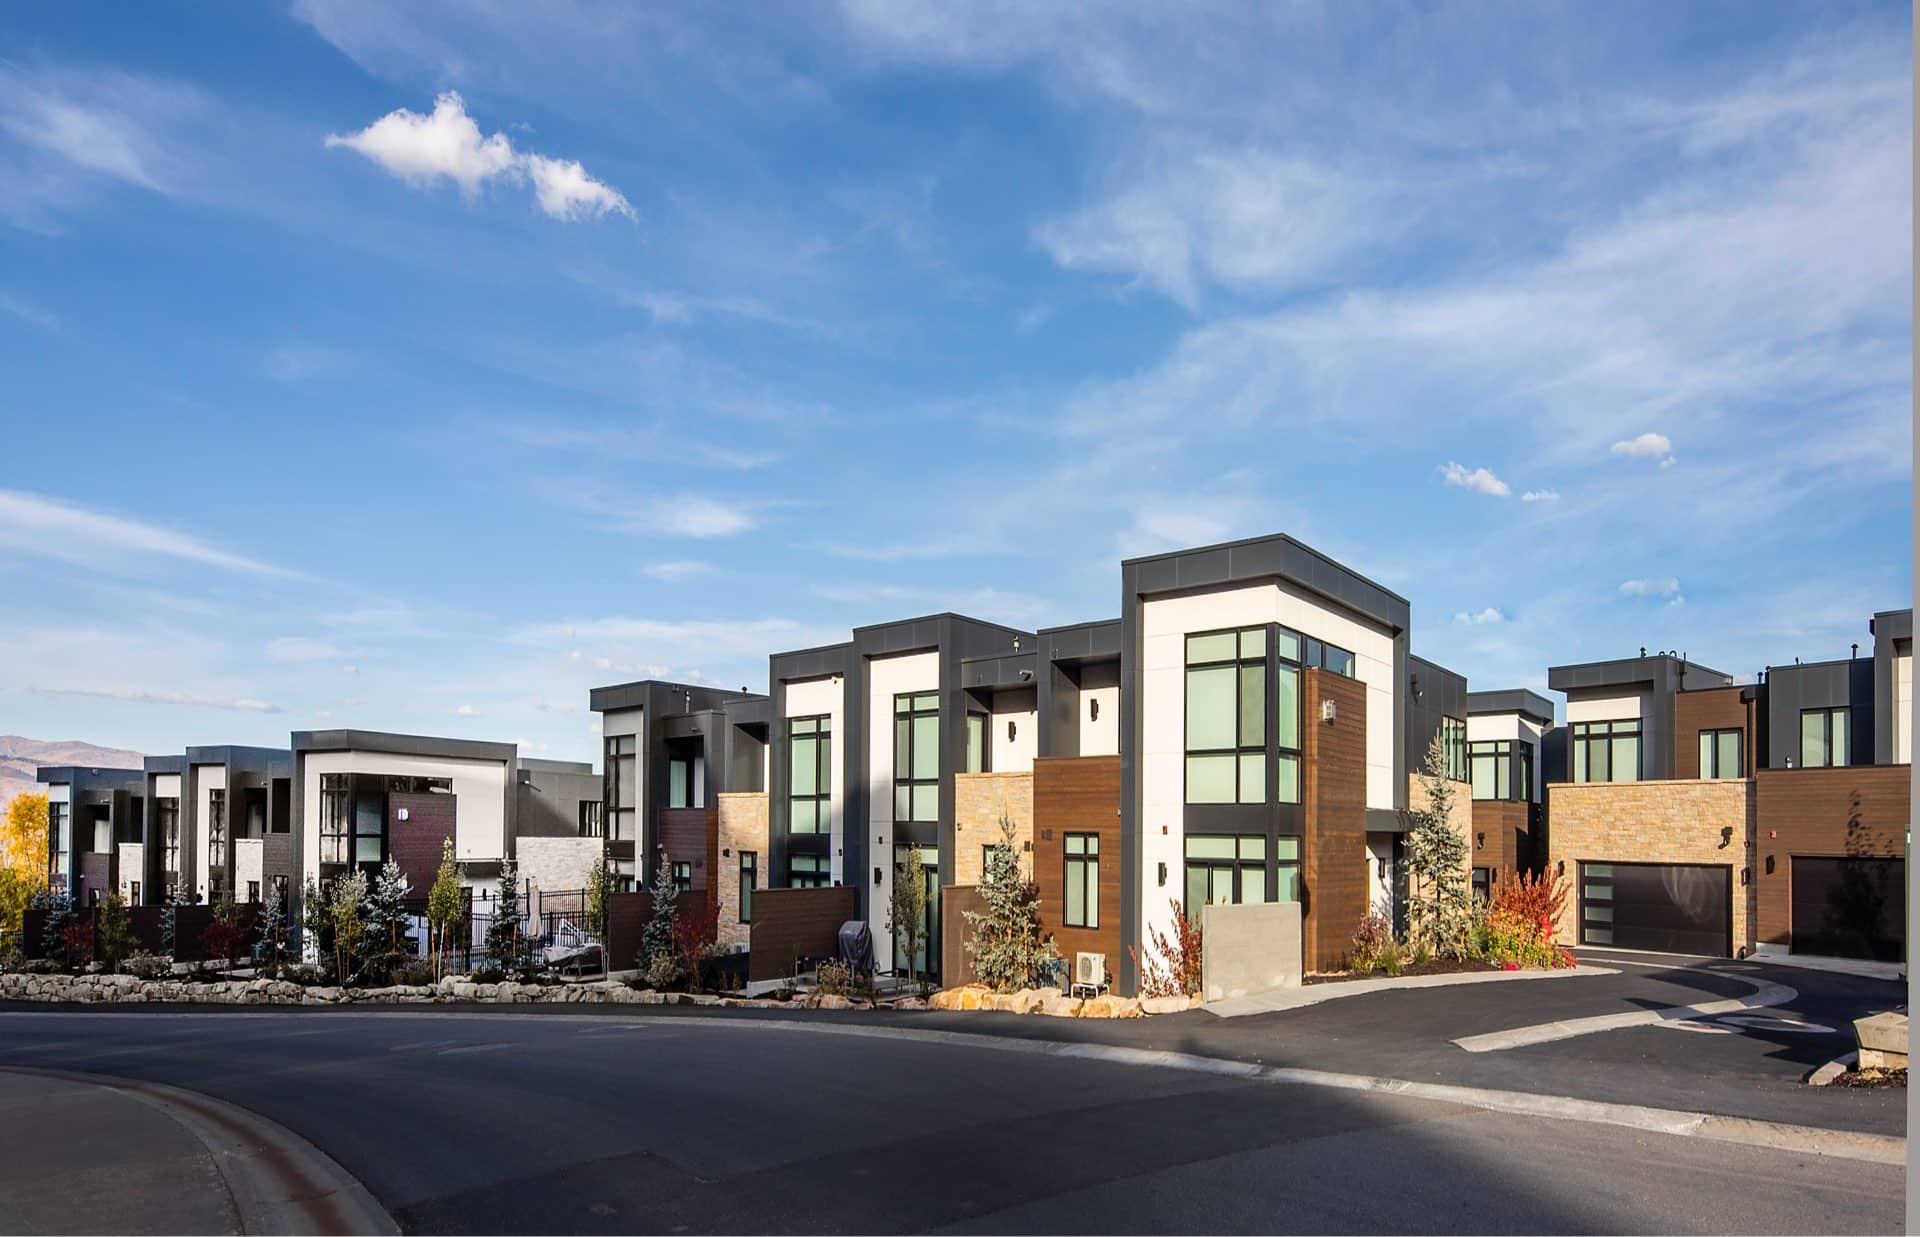 Viridian Townhomes - architectural design by Elliott Workgroup